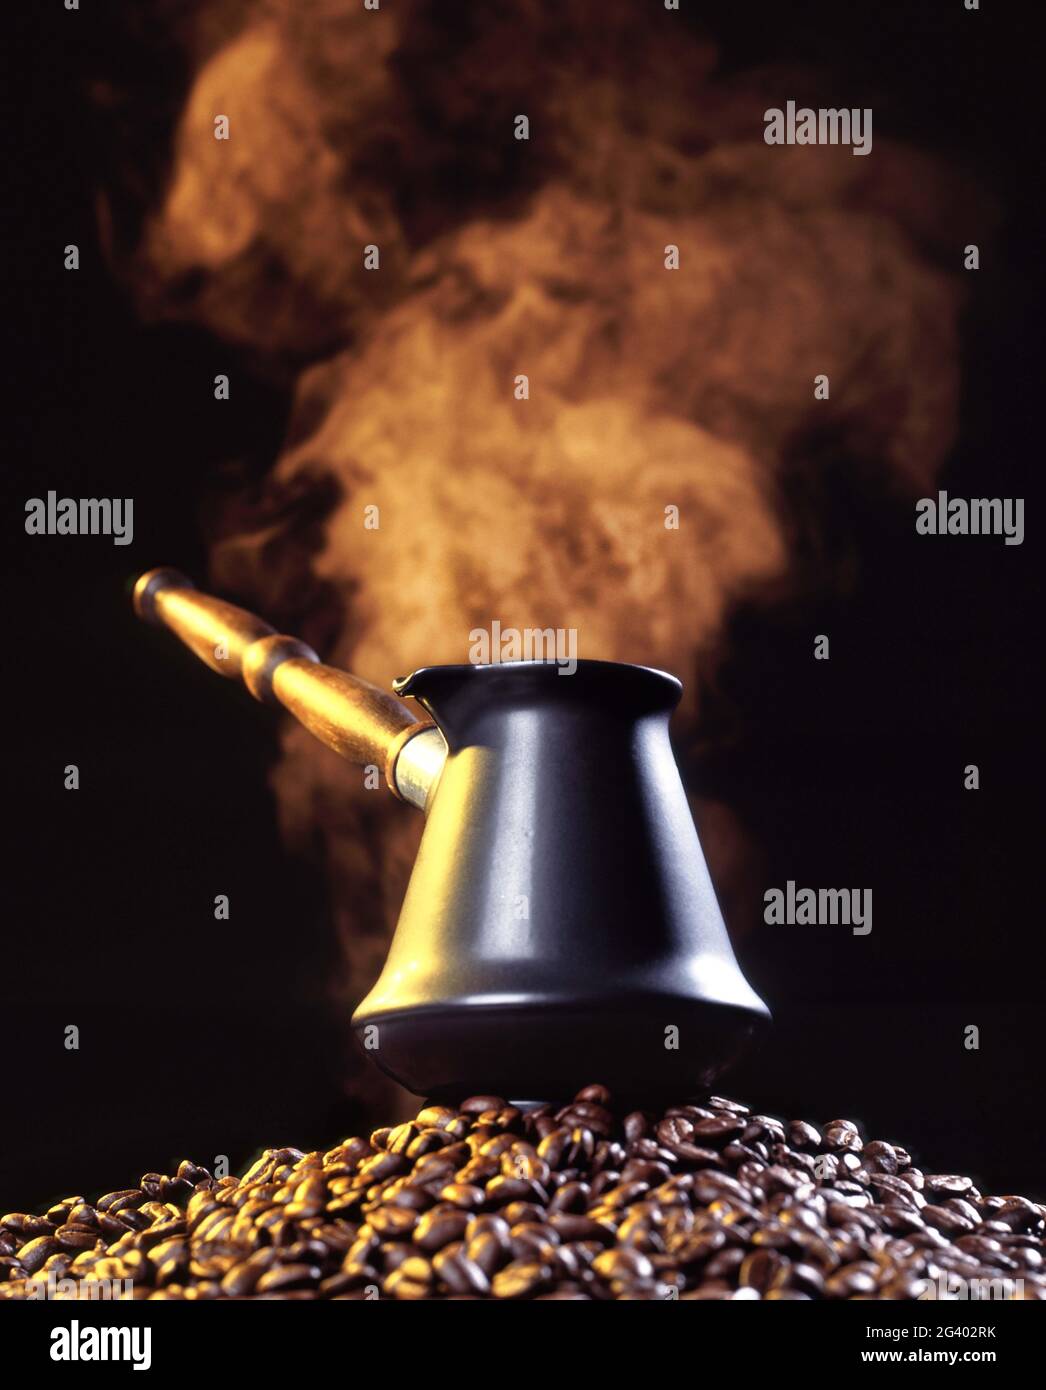 Coffee Jug And Beans With Steam Stock Photo